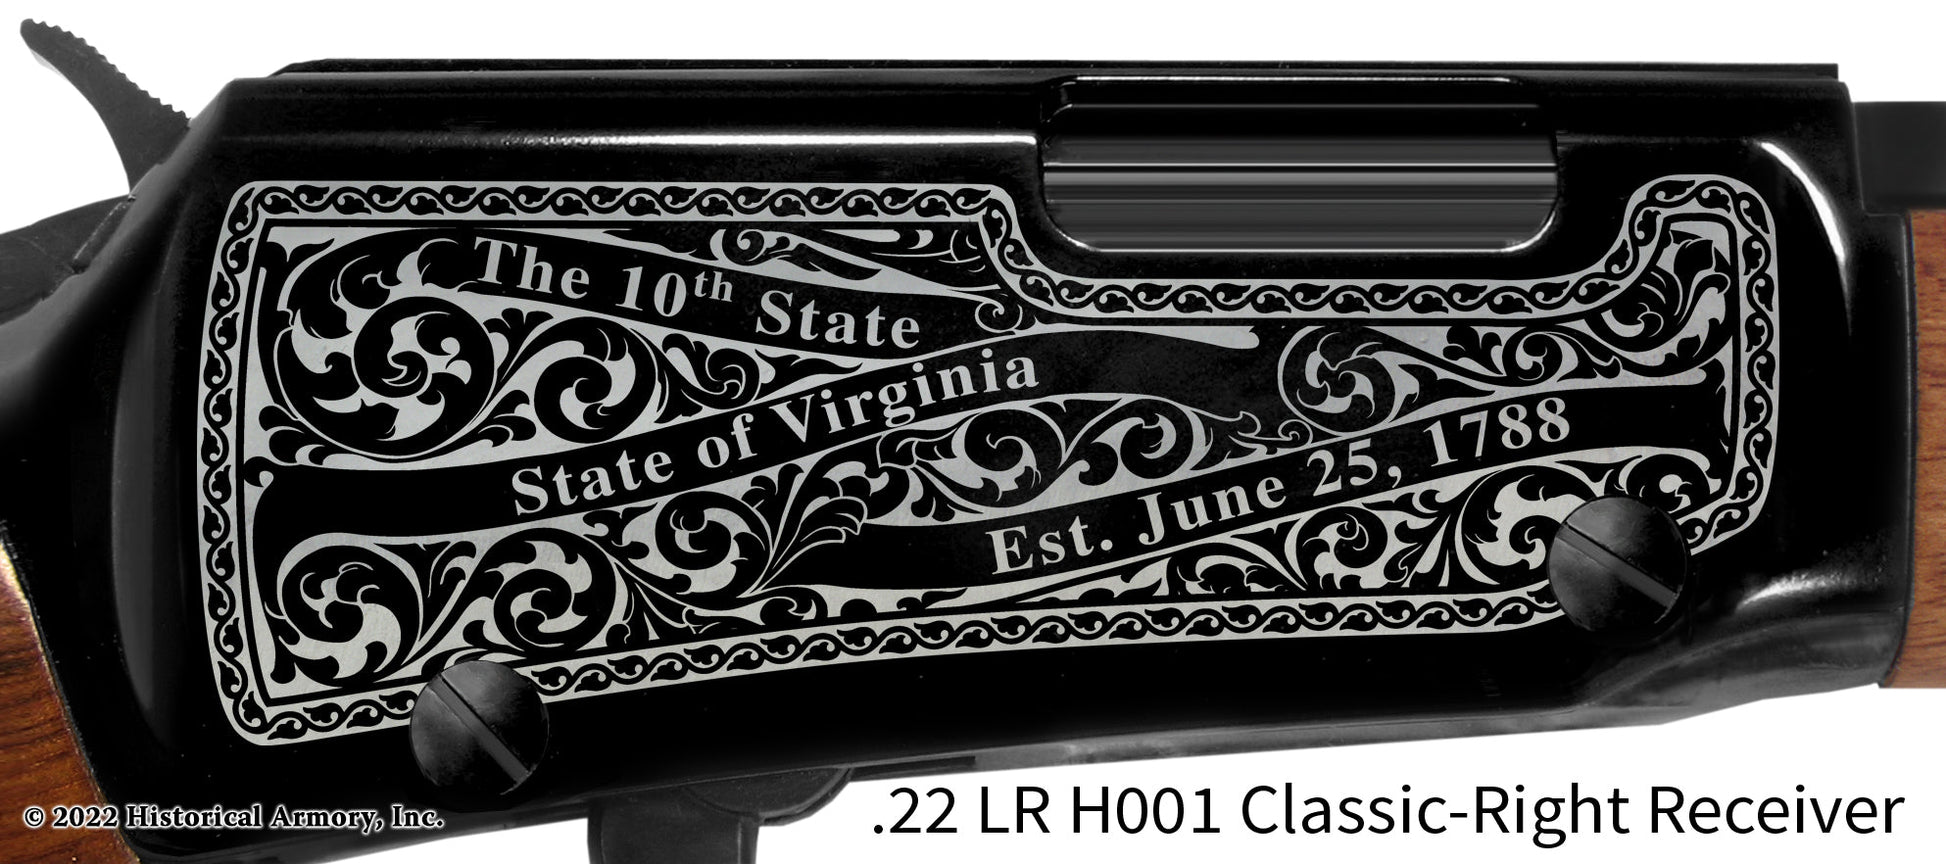 Grayson County Virginia Engraved Henry H001 Rifle